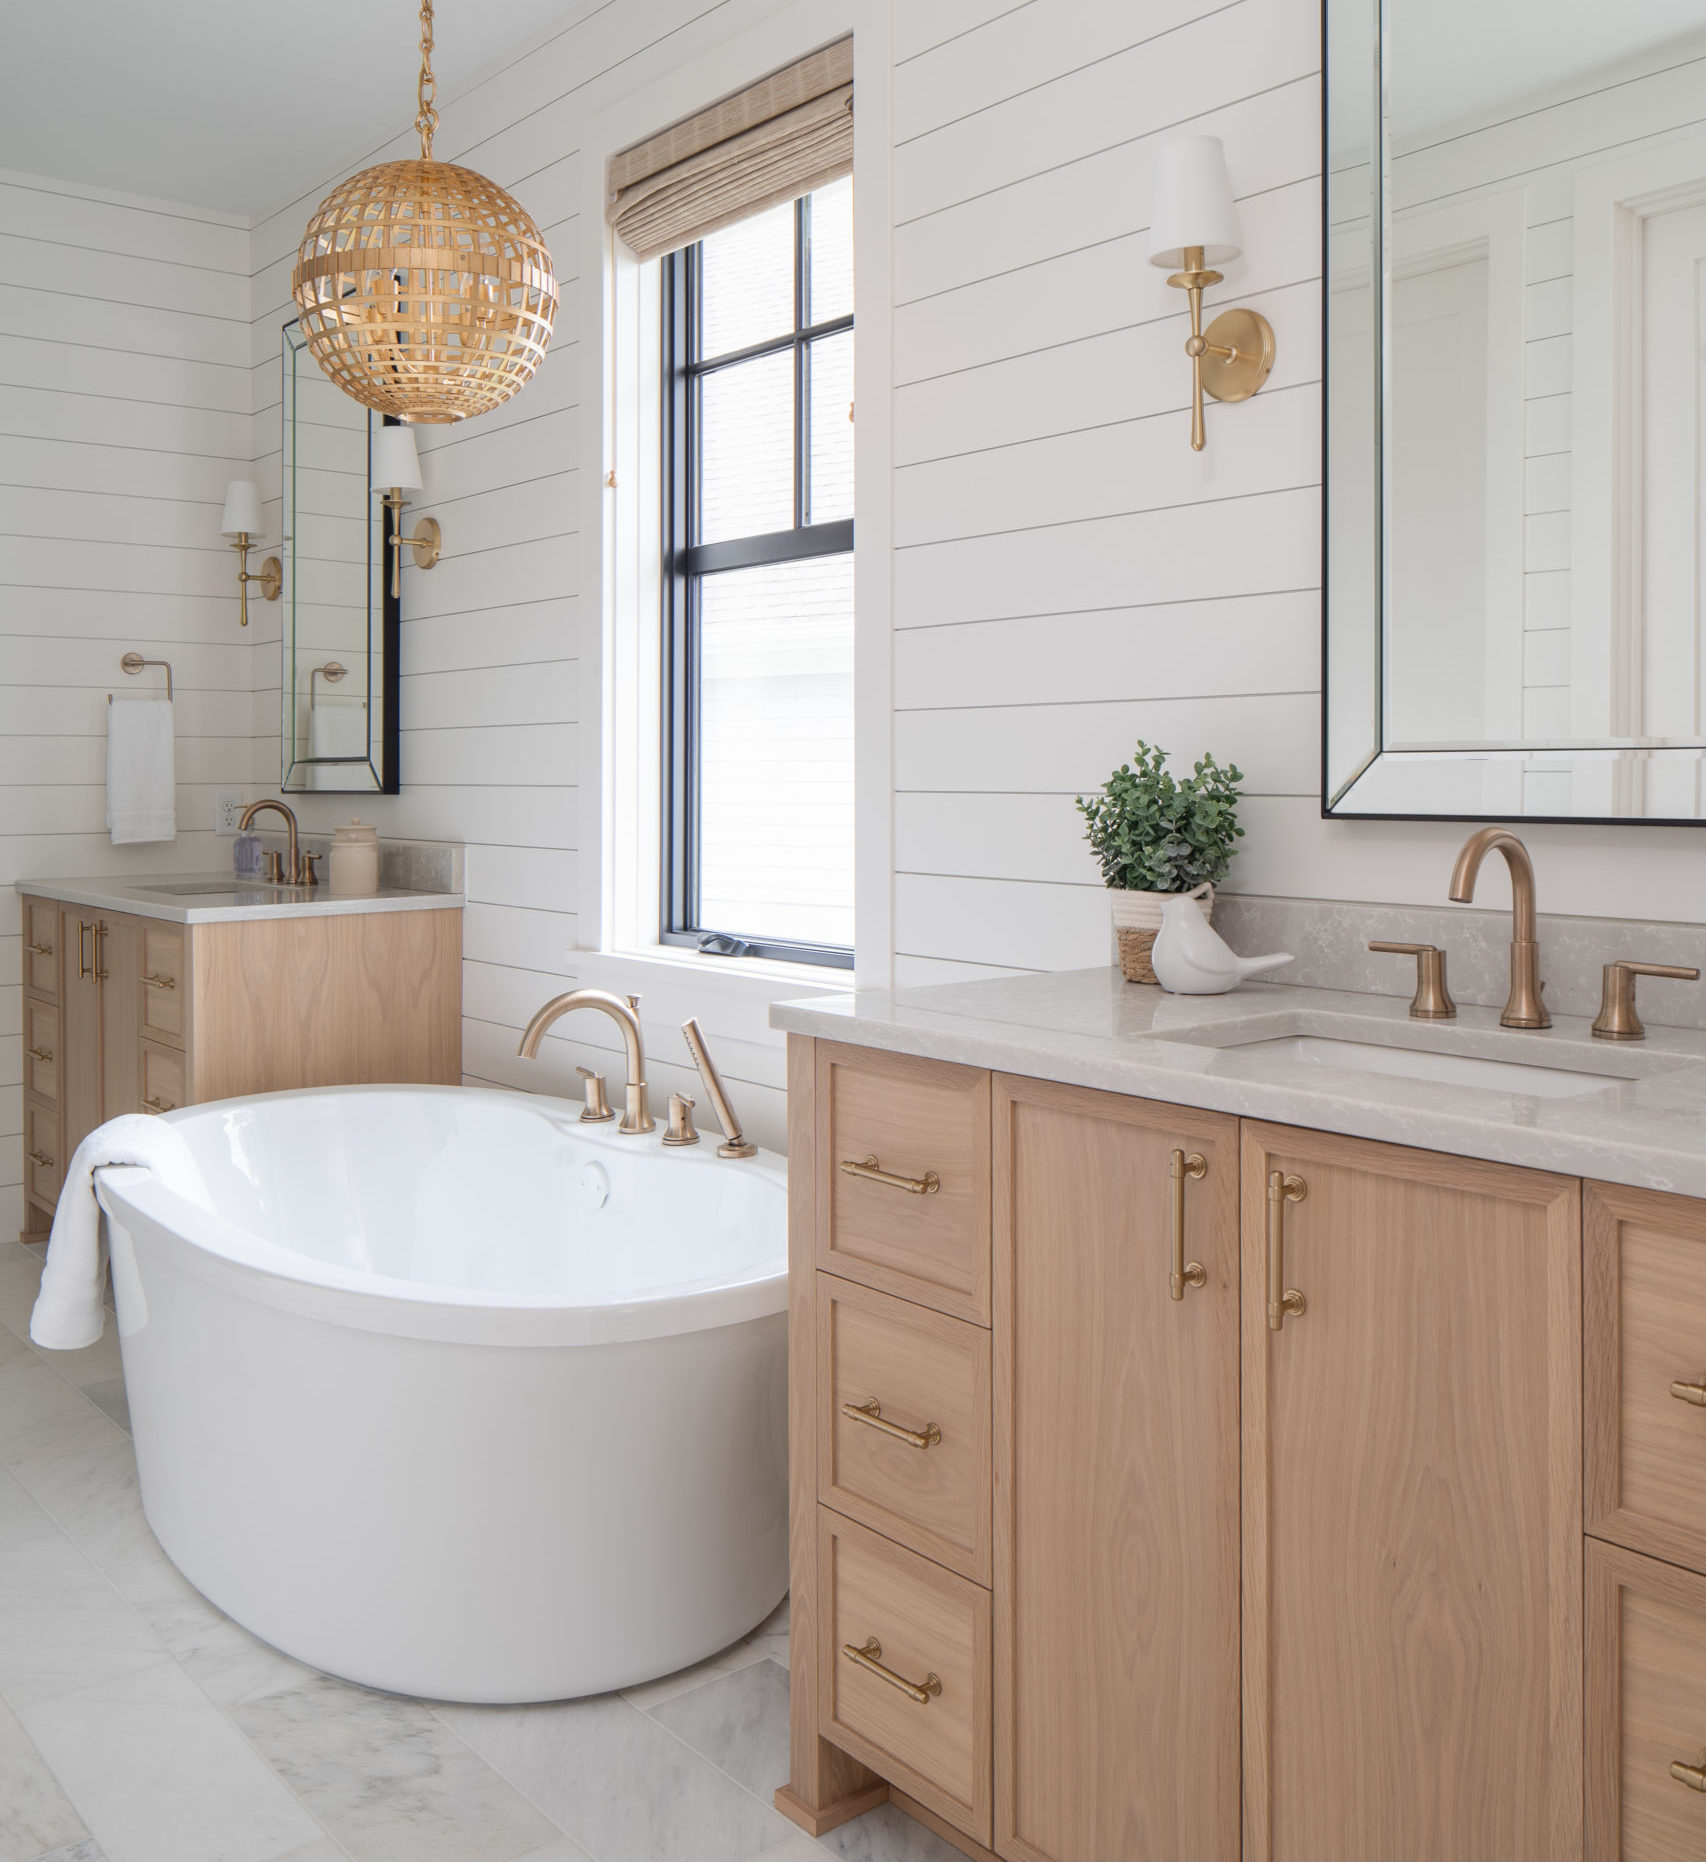 The Lake Escape custom home remodel features a white bathroom with wooden cabinets and a large tub.